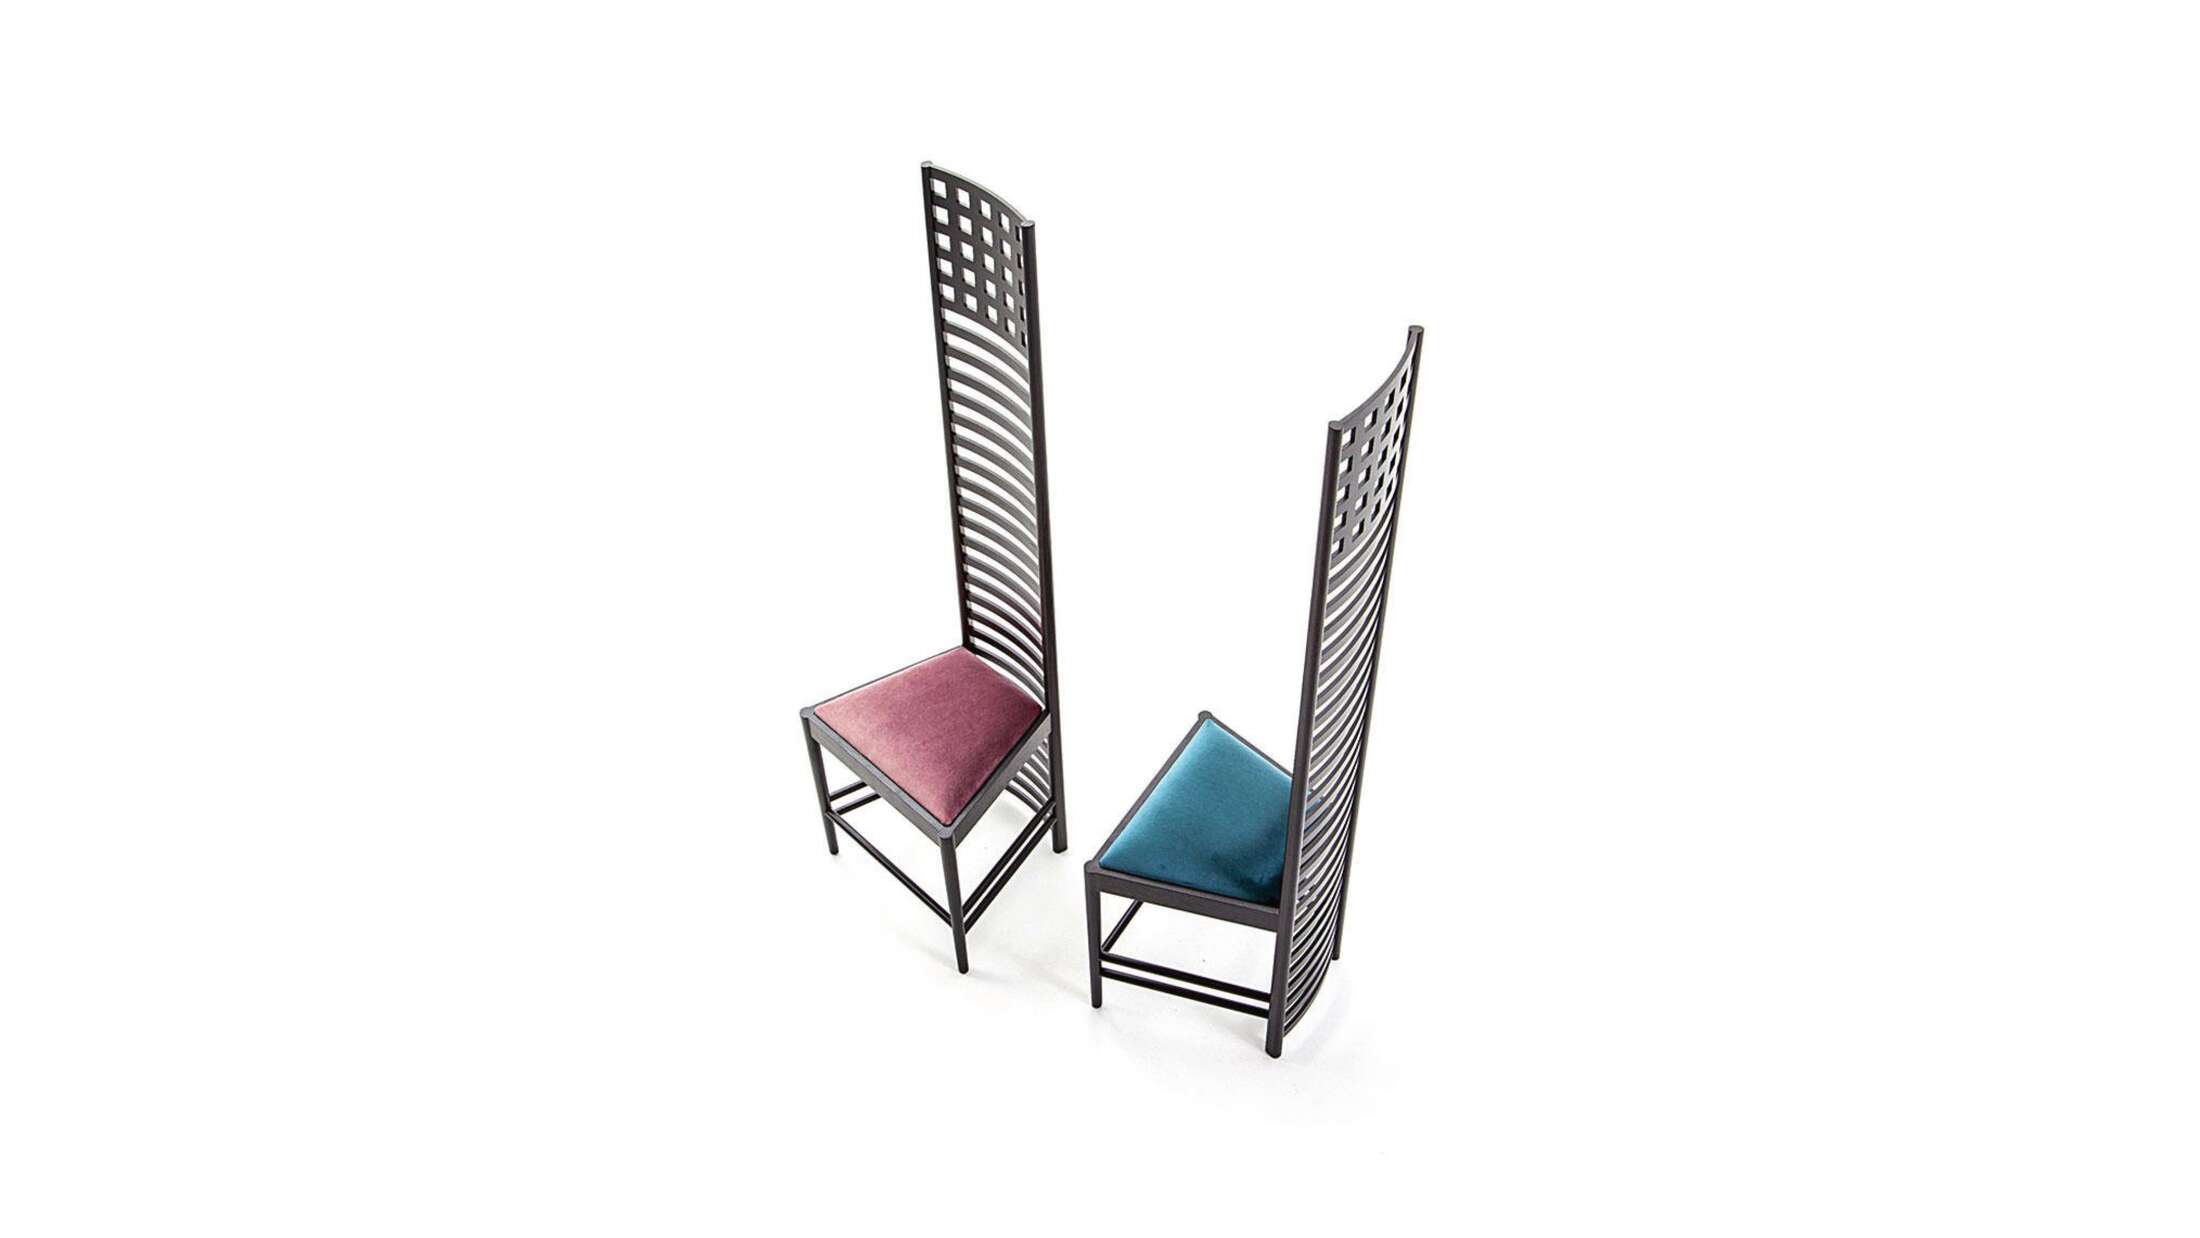 Chair designed by Charles Rennie Mackintosh in 1902. Relaunched in 1973. Manufactured by Cassina in Italy. Prices vary dependent on color and material of the piece.

Originally a furnishing accessory for one of Mackintosh’s major design projects,